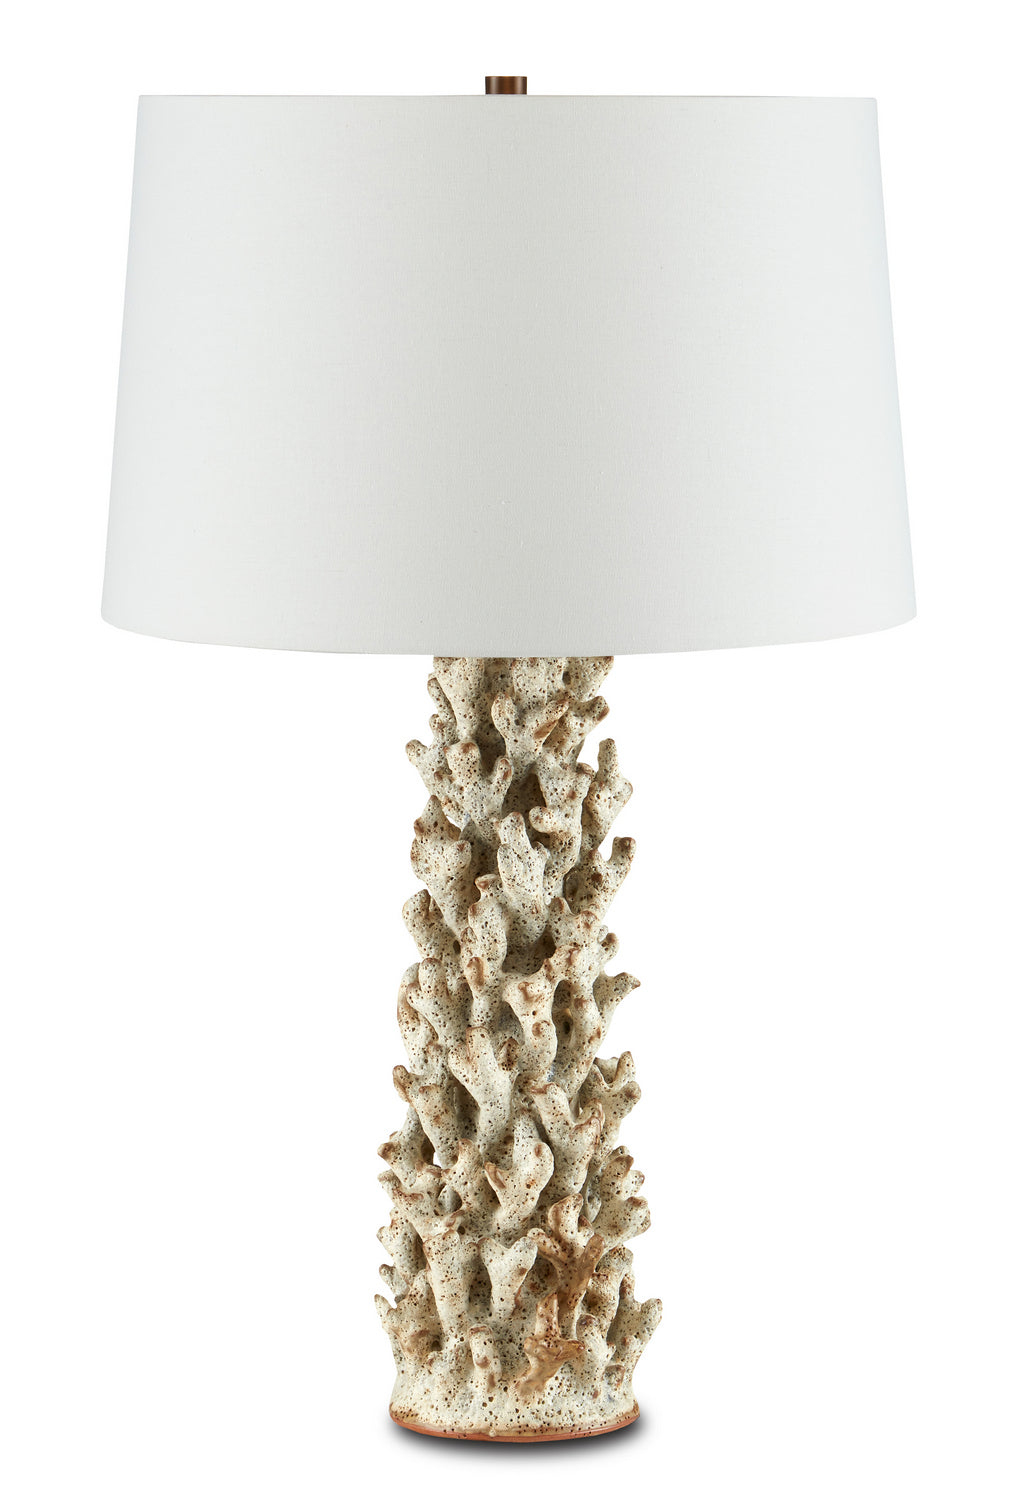 One Light Table Lamp from the Staghorn collection in Sunken White finish